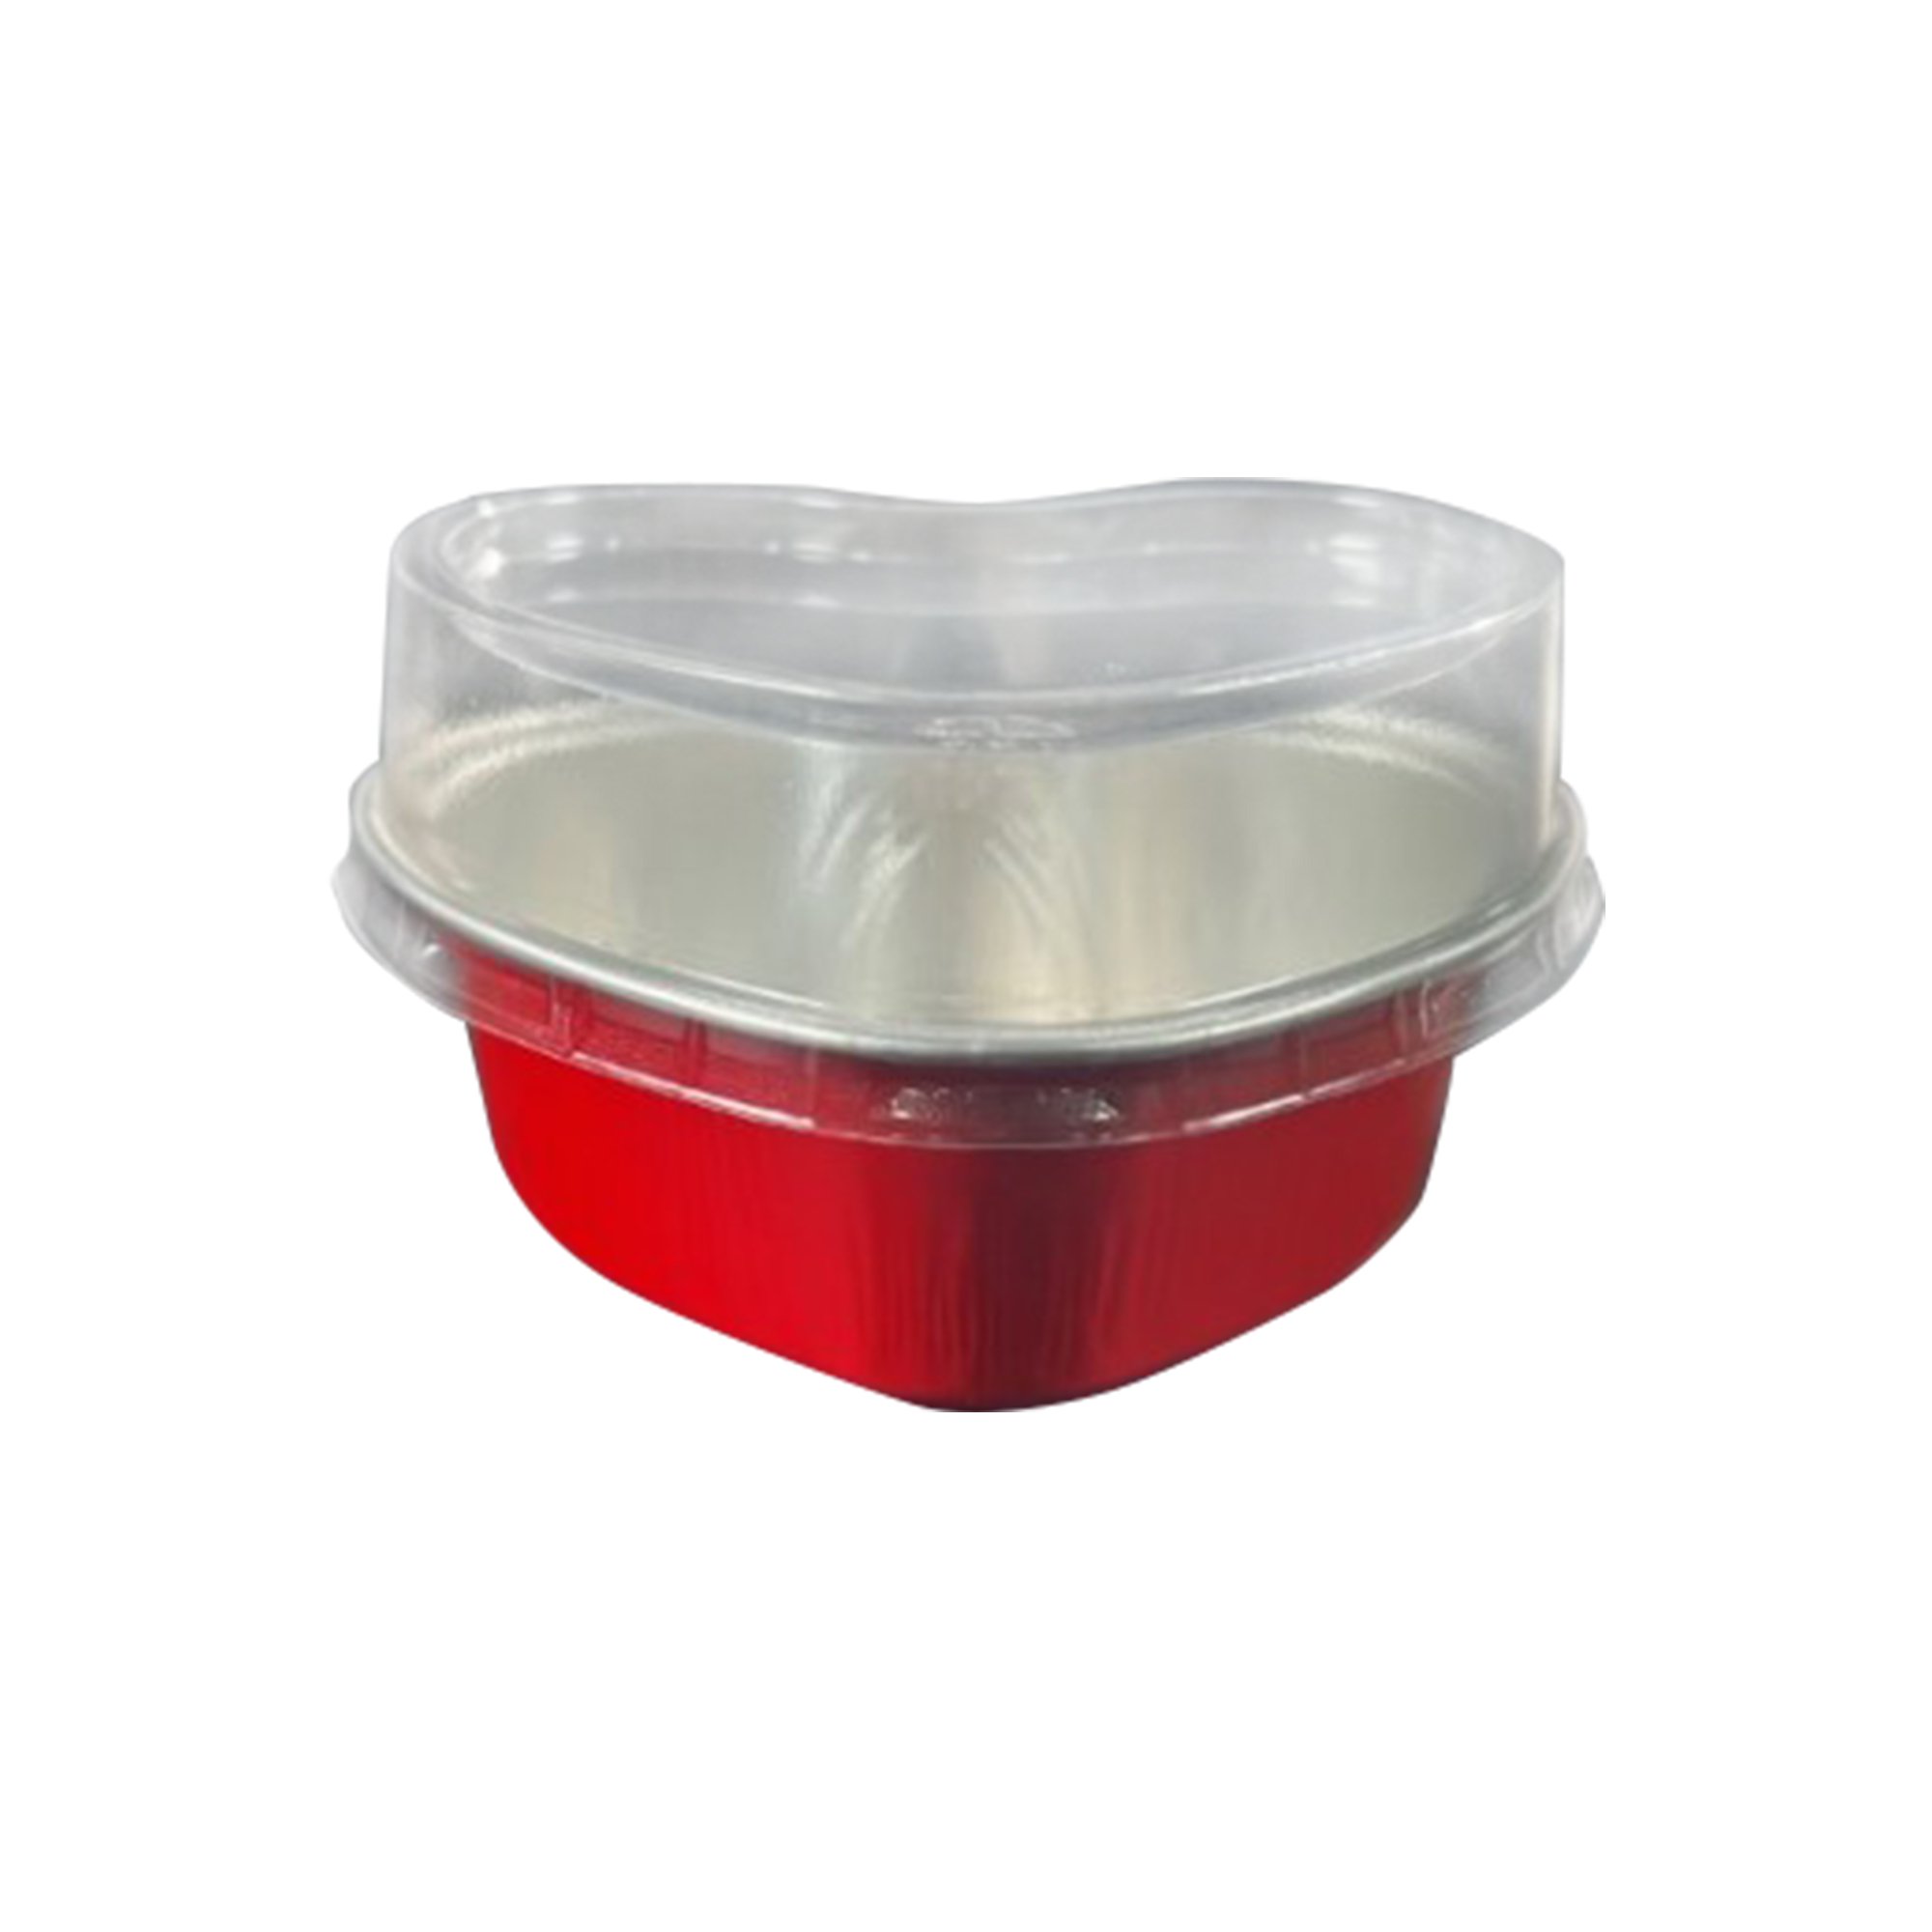 3oz Heart Aluminum Baking Cup With Dome Lid 50pc/pack - Red